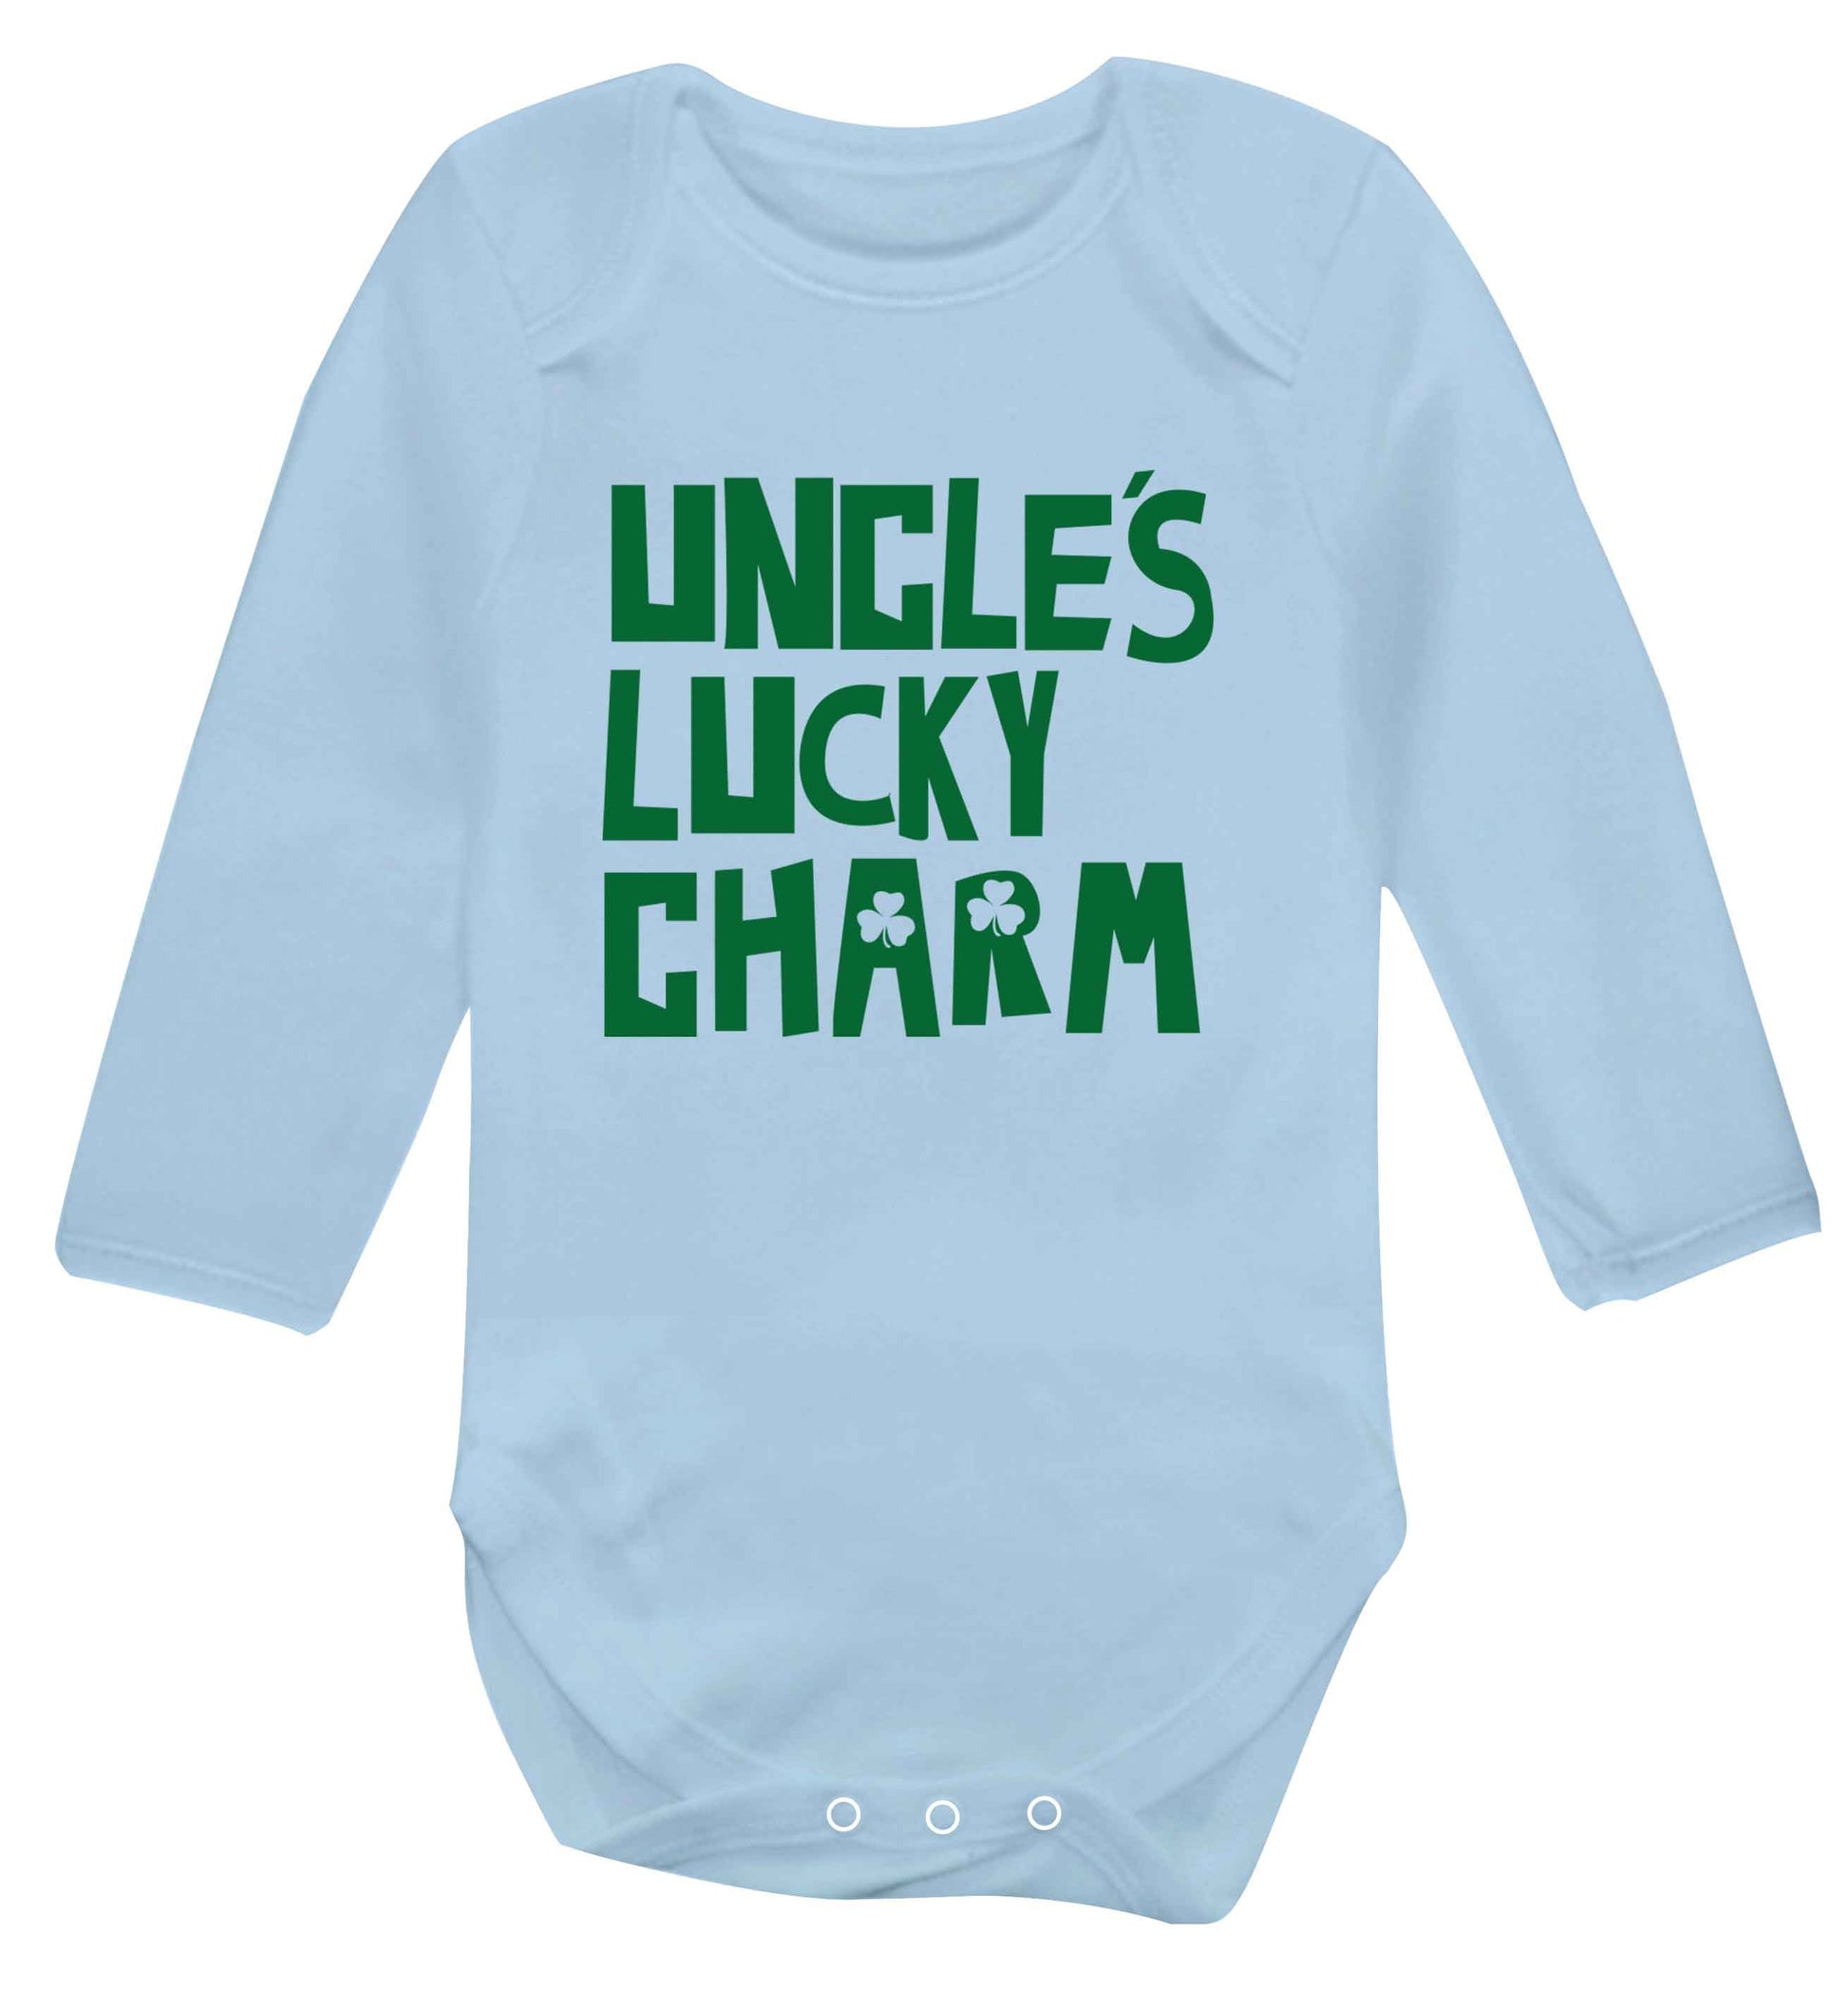 Uncles lucky charm baby vest long sleeved pale blue 6-12 months